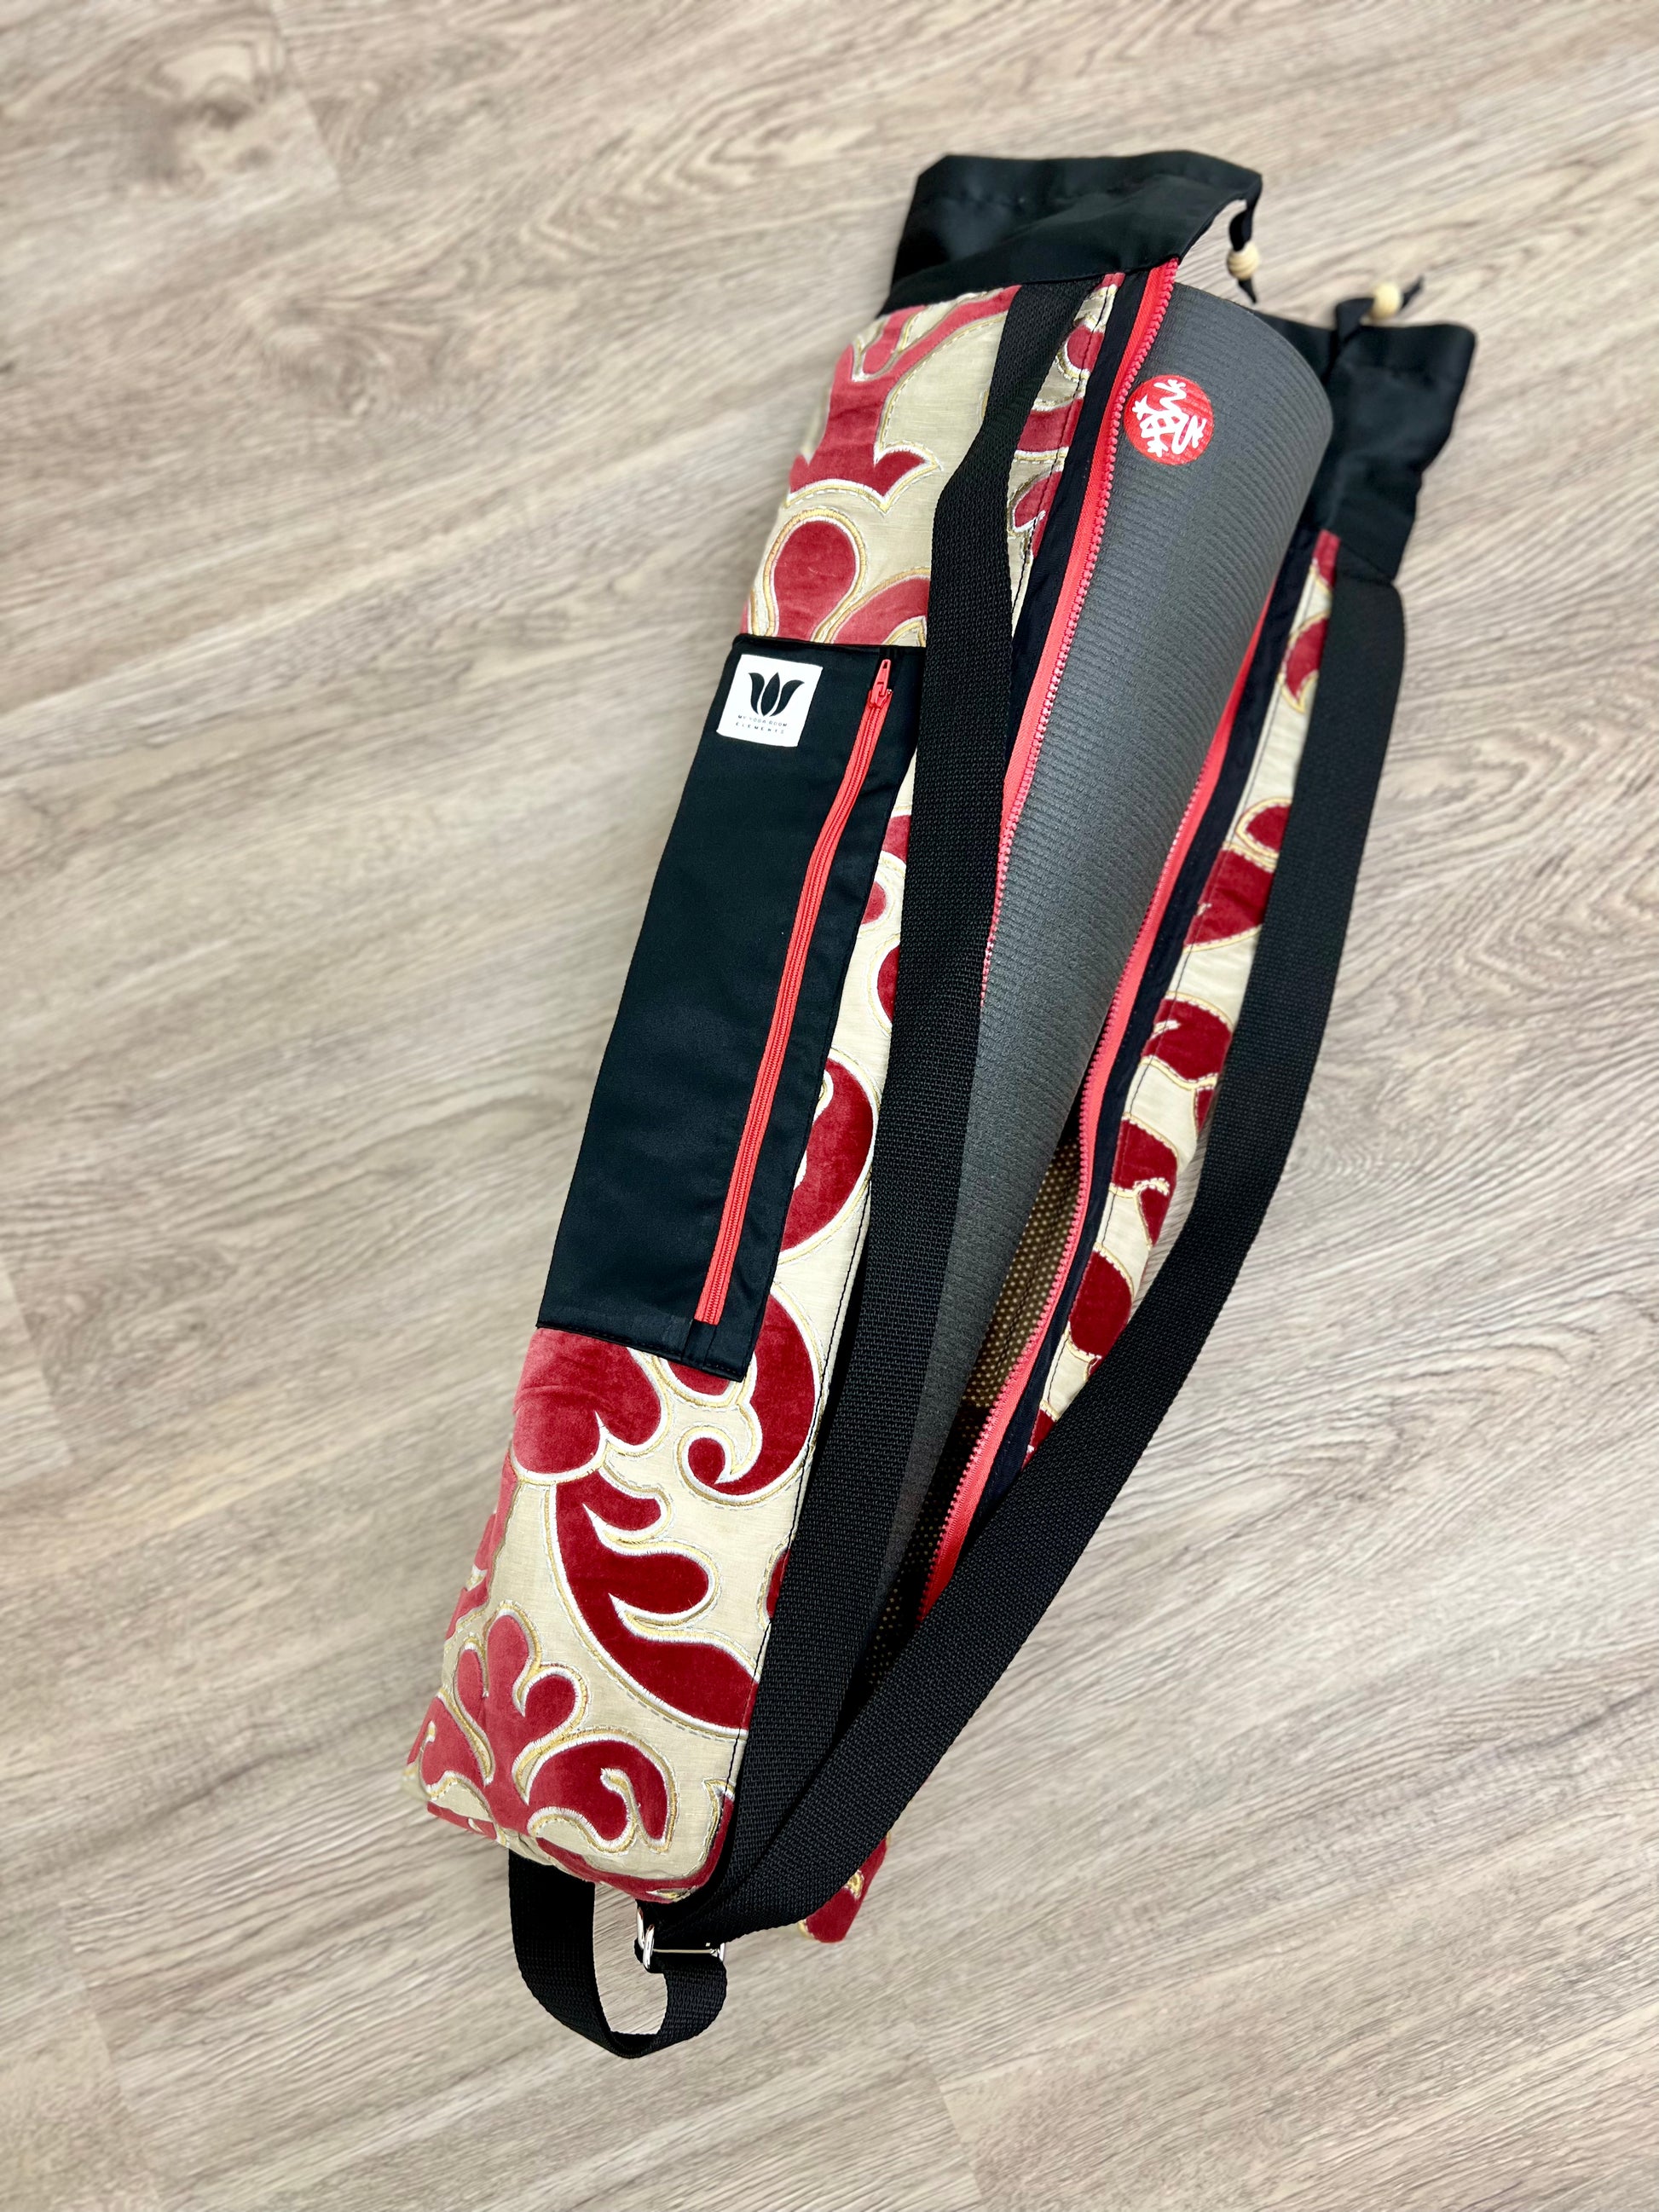 Yoga Mat Bag, Backpack Option in Red and Gold Scroll embroidery print handcrafted by My Yoga Room Elements in their Canadian Studio Full zipper opening